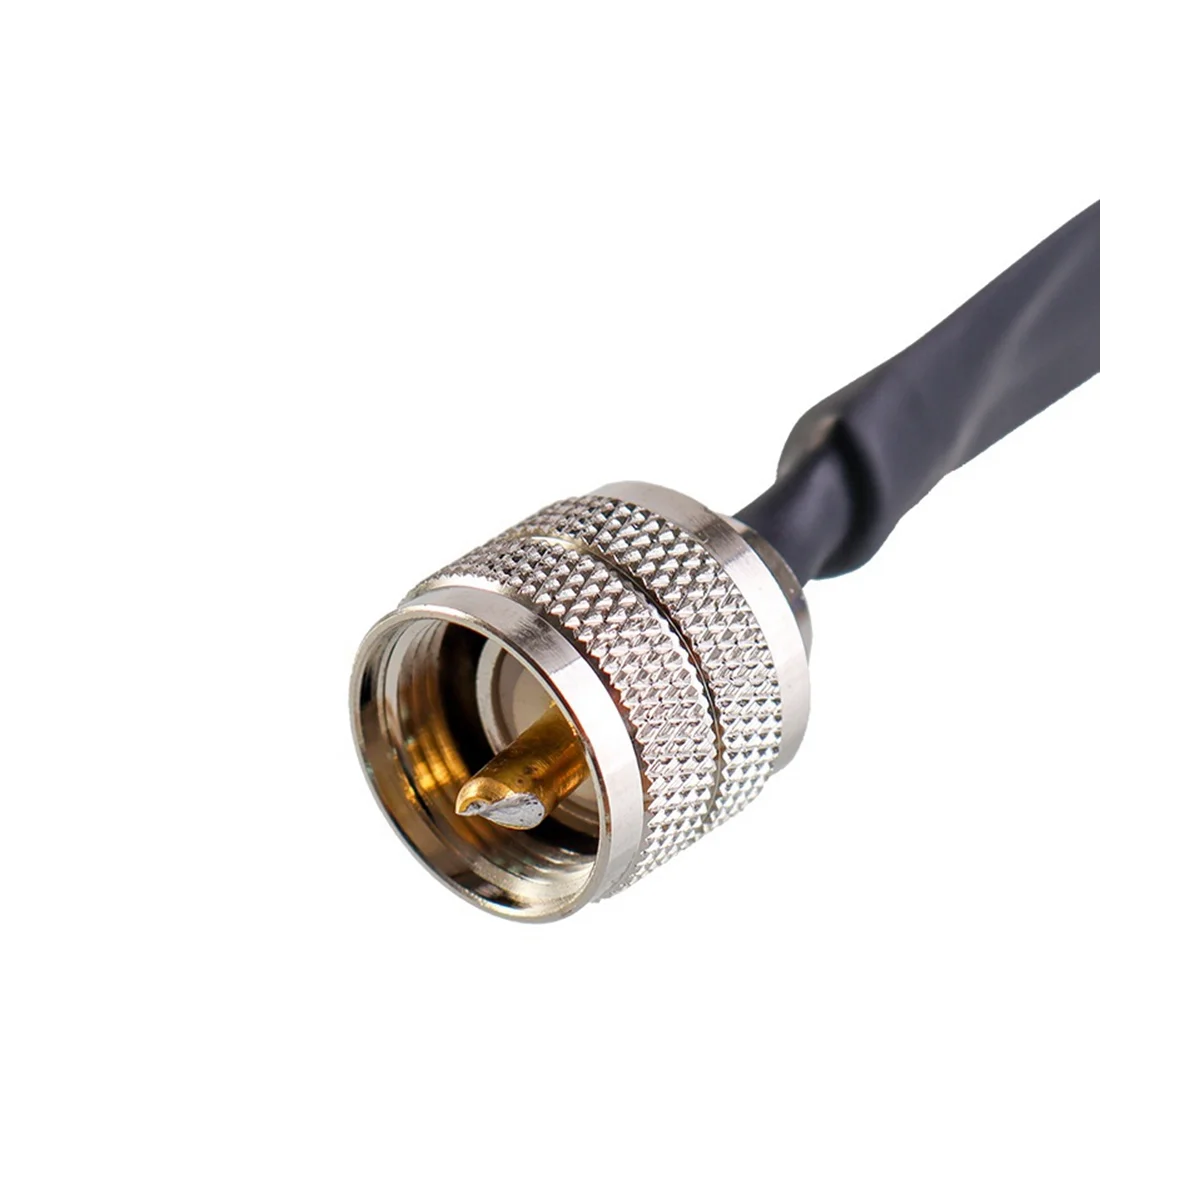 Window/Door Pass Through Flat RF Coaxial Cable SO239 UHF Female to UHF Female 50 Ohm RF Coax Pigtail Extension Cord,50cm images - 6